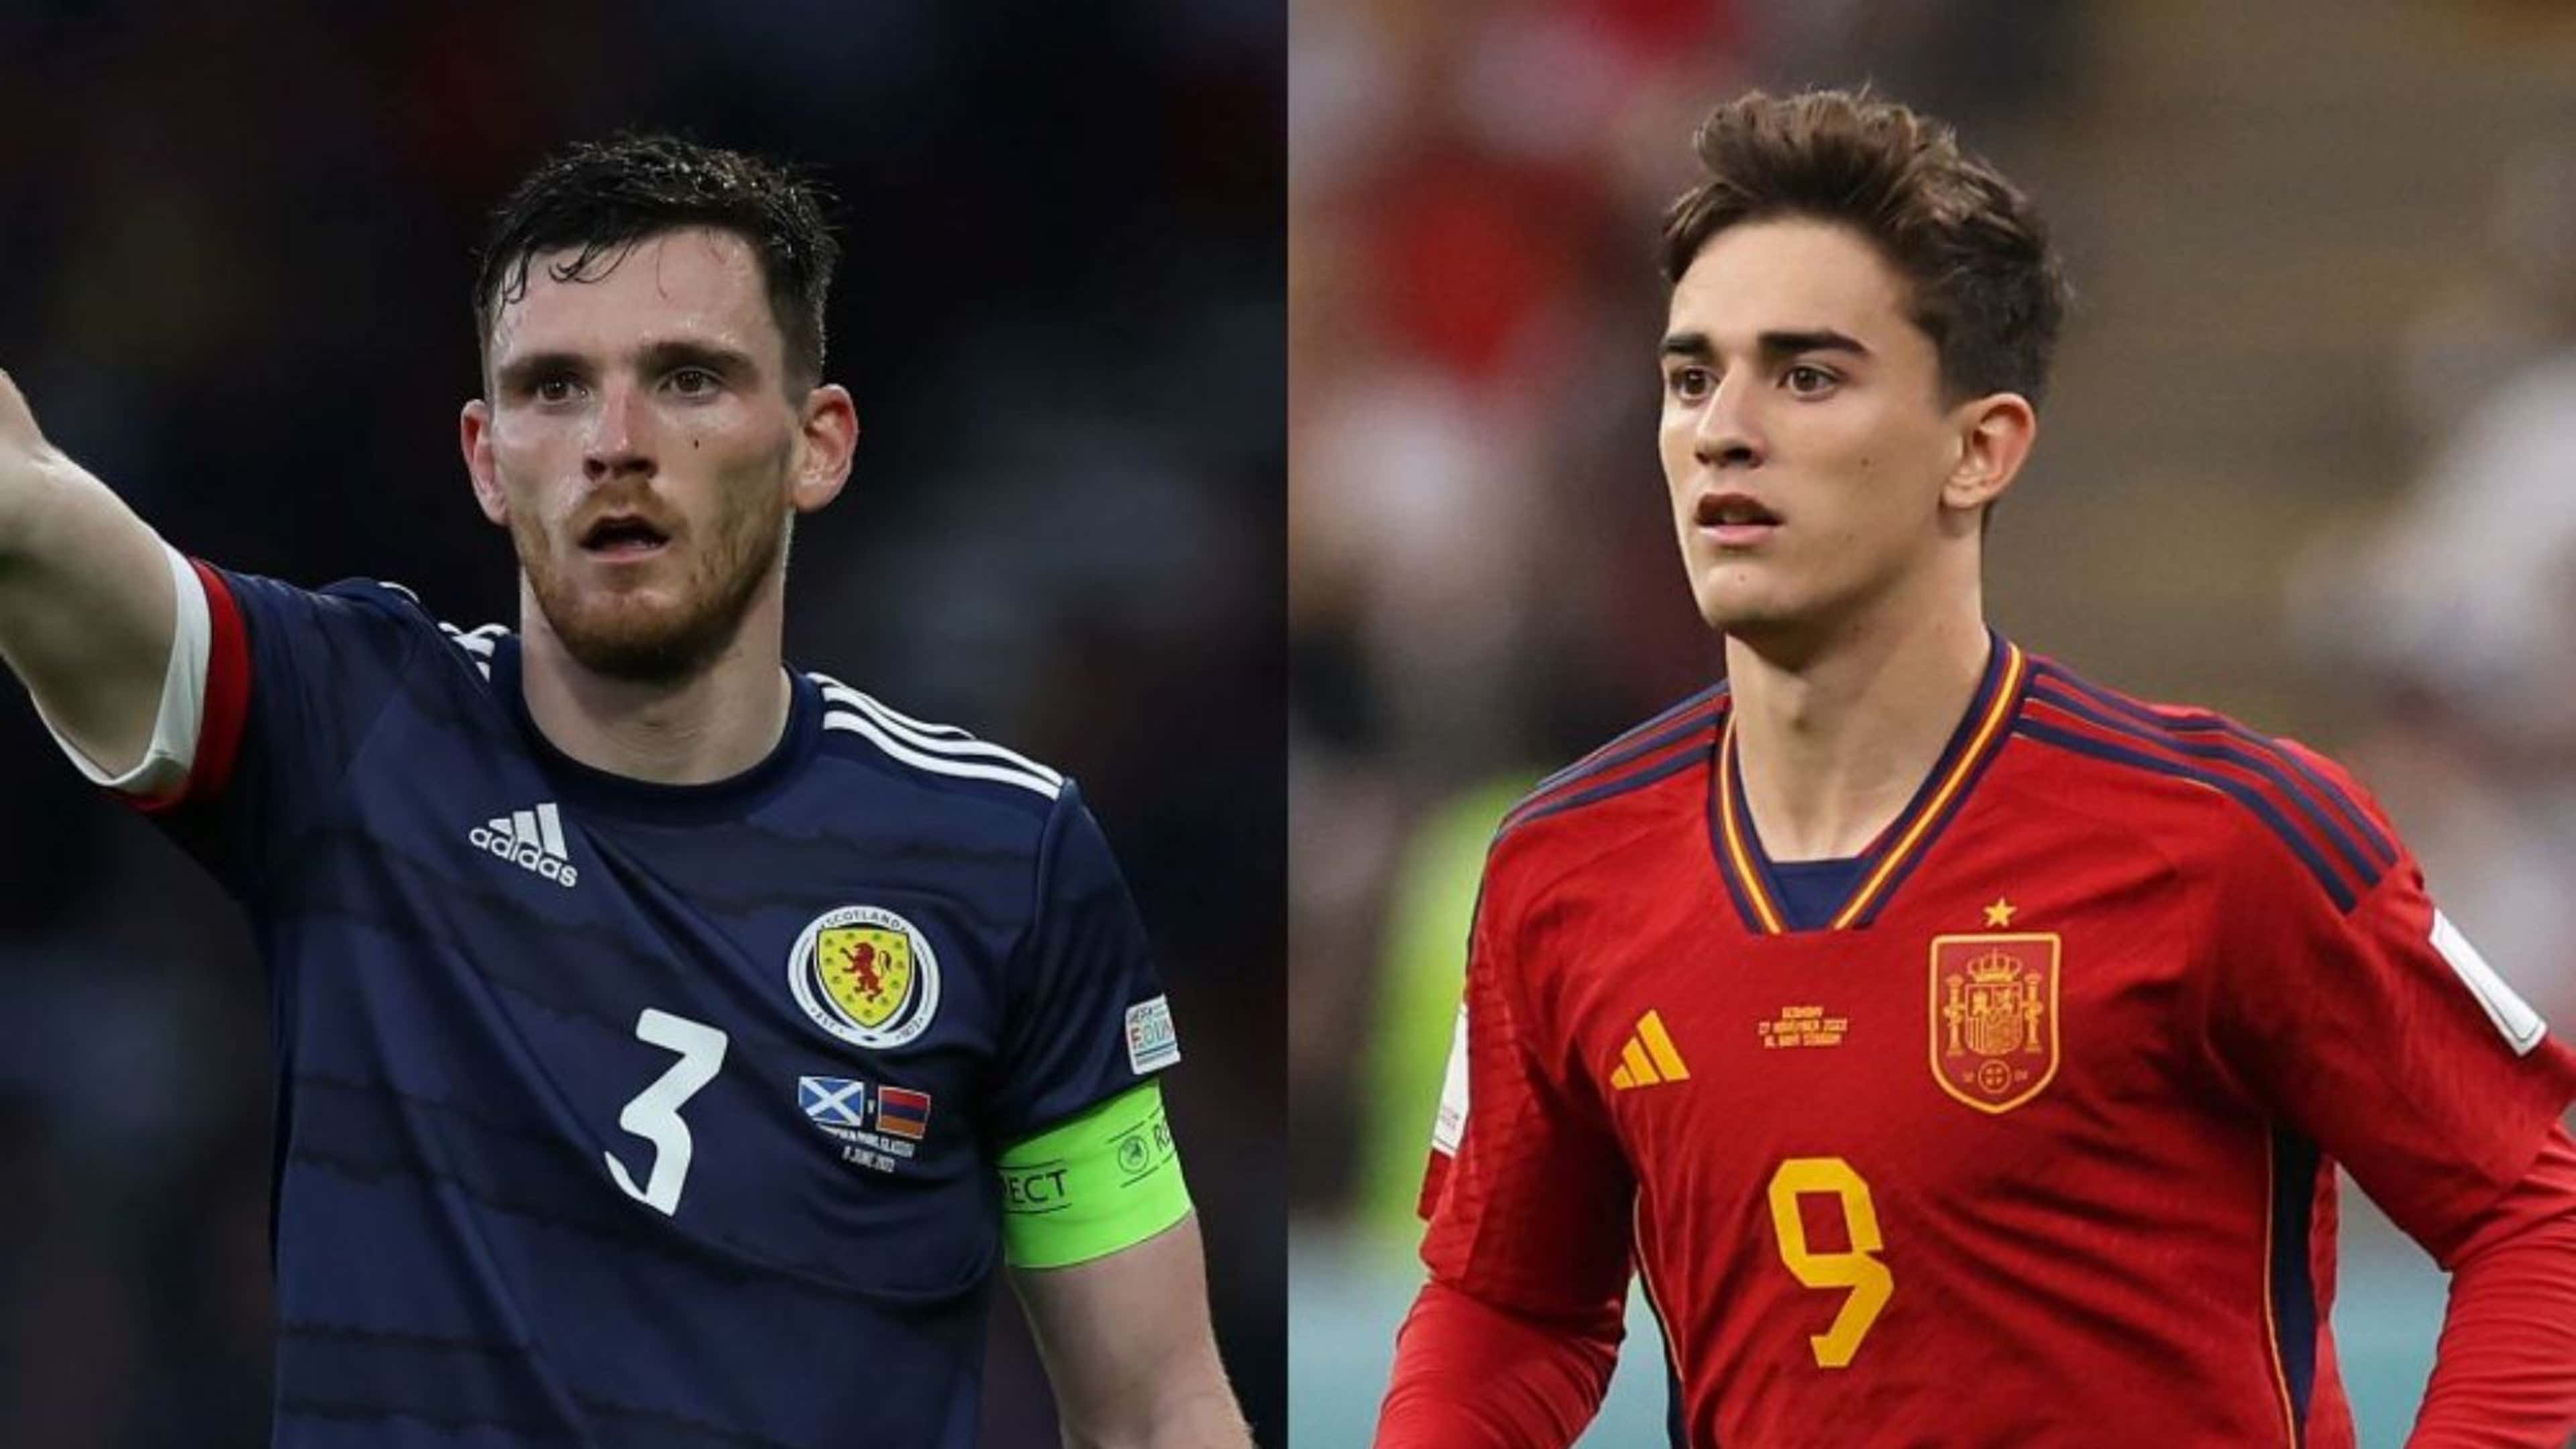 Scotland vs Spain: Where to watch the match online, live stream, TV channels & kick-off time | Goal.com US